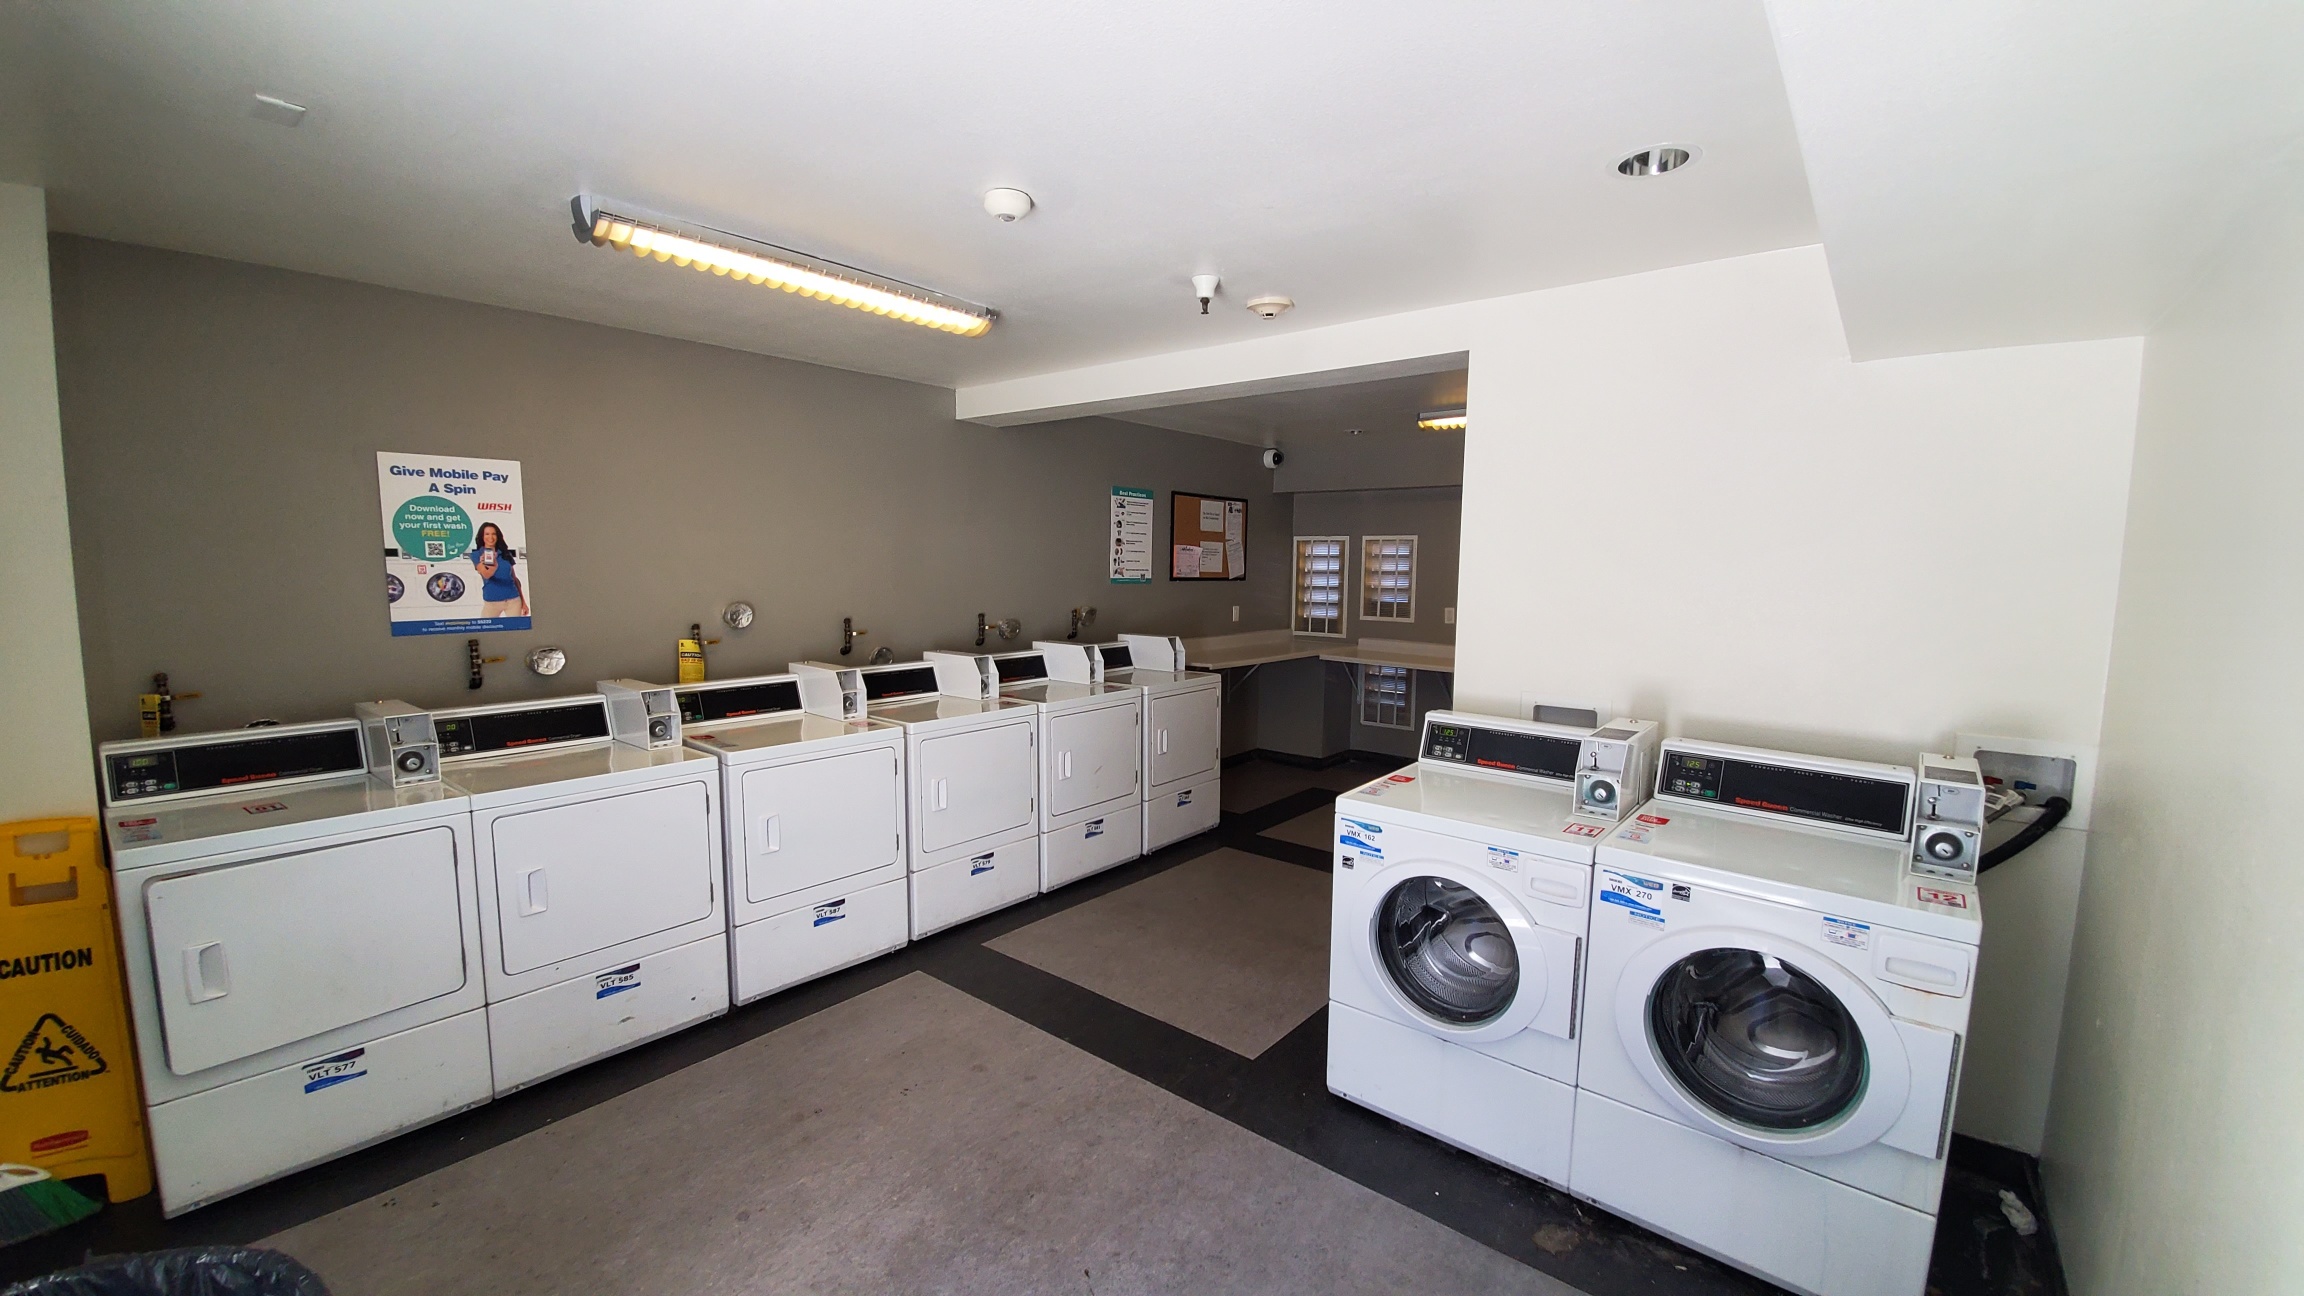 Different angle of laundry room with multiple washer and dryer machines. Room has a shelf for folding that is L shapes along the walls. There is a security camera on an upper corner of the room, and posted signs across the walls.